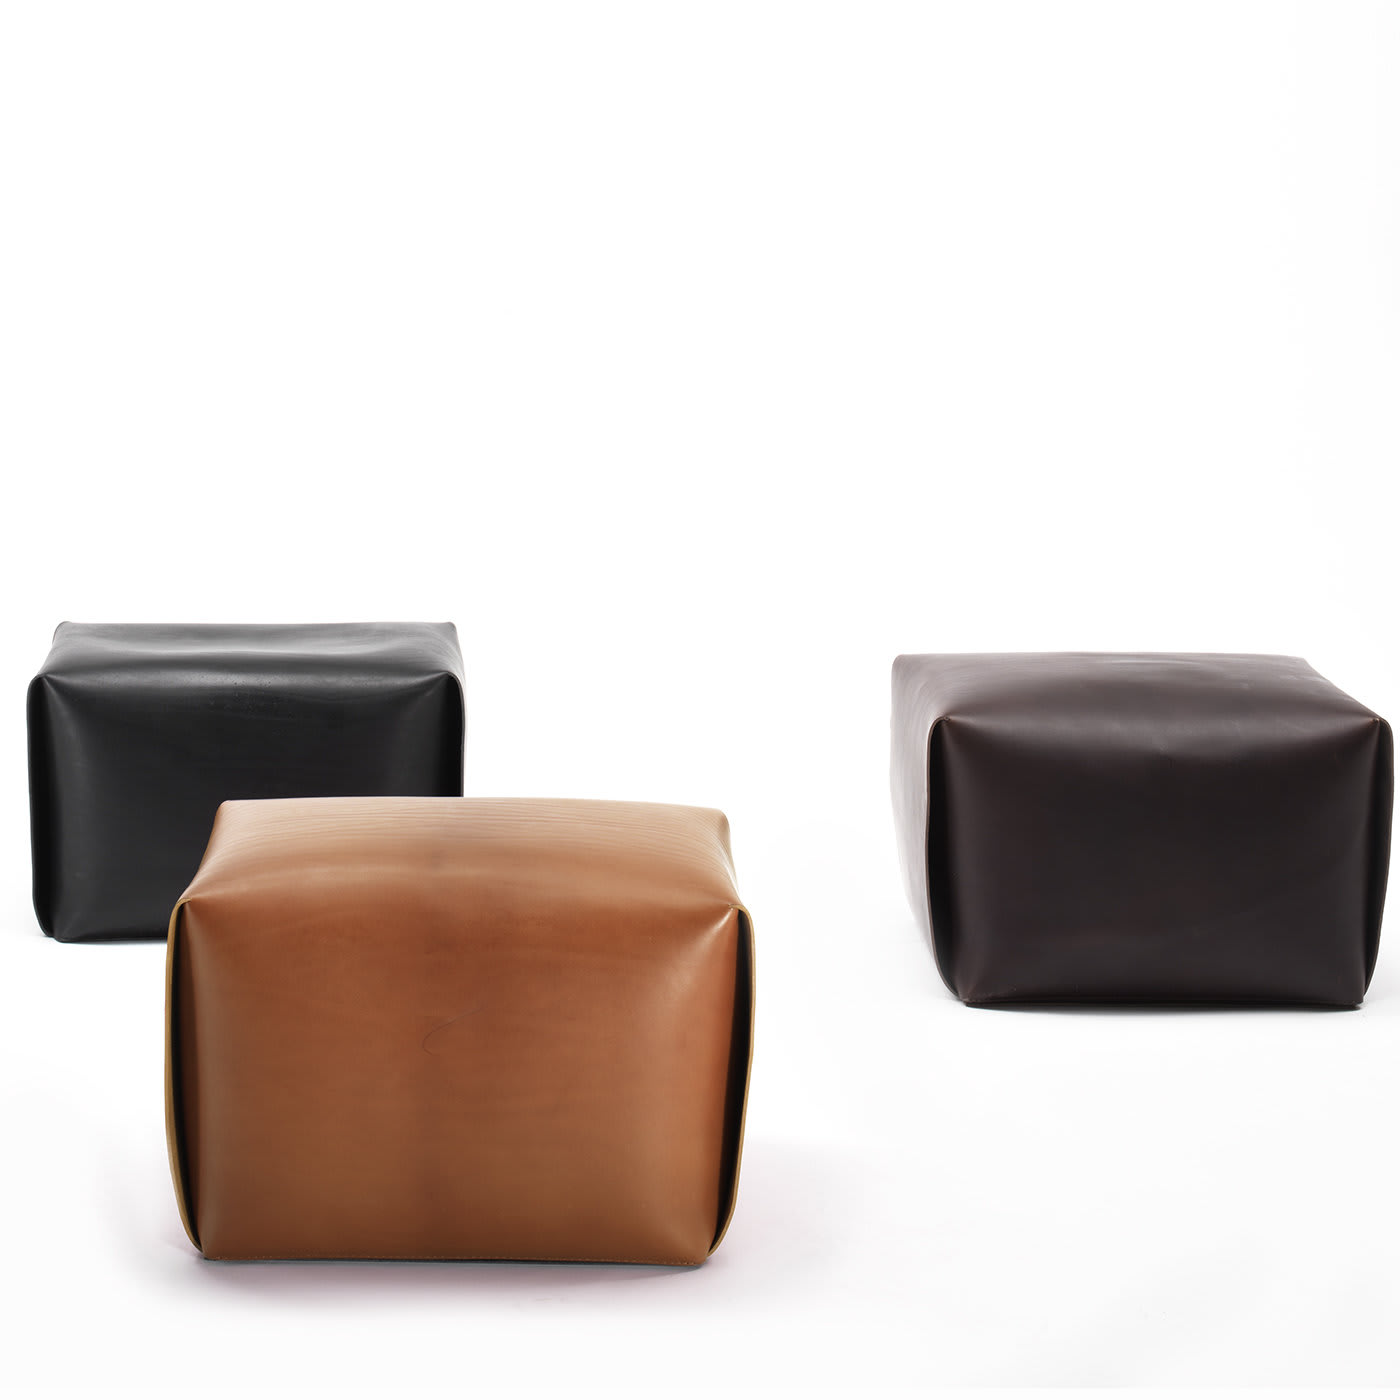 Bao Brown Leather Pouf ☞ Seat: Leather